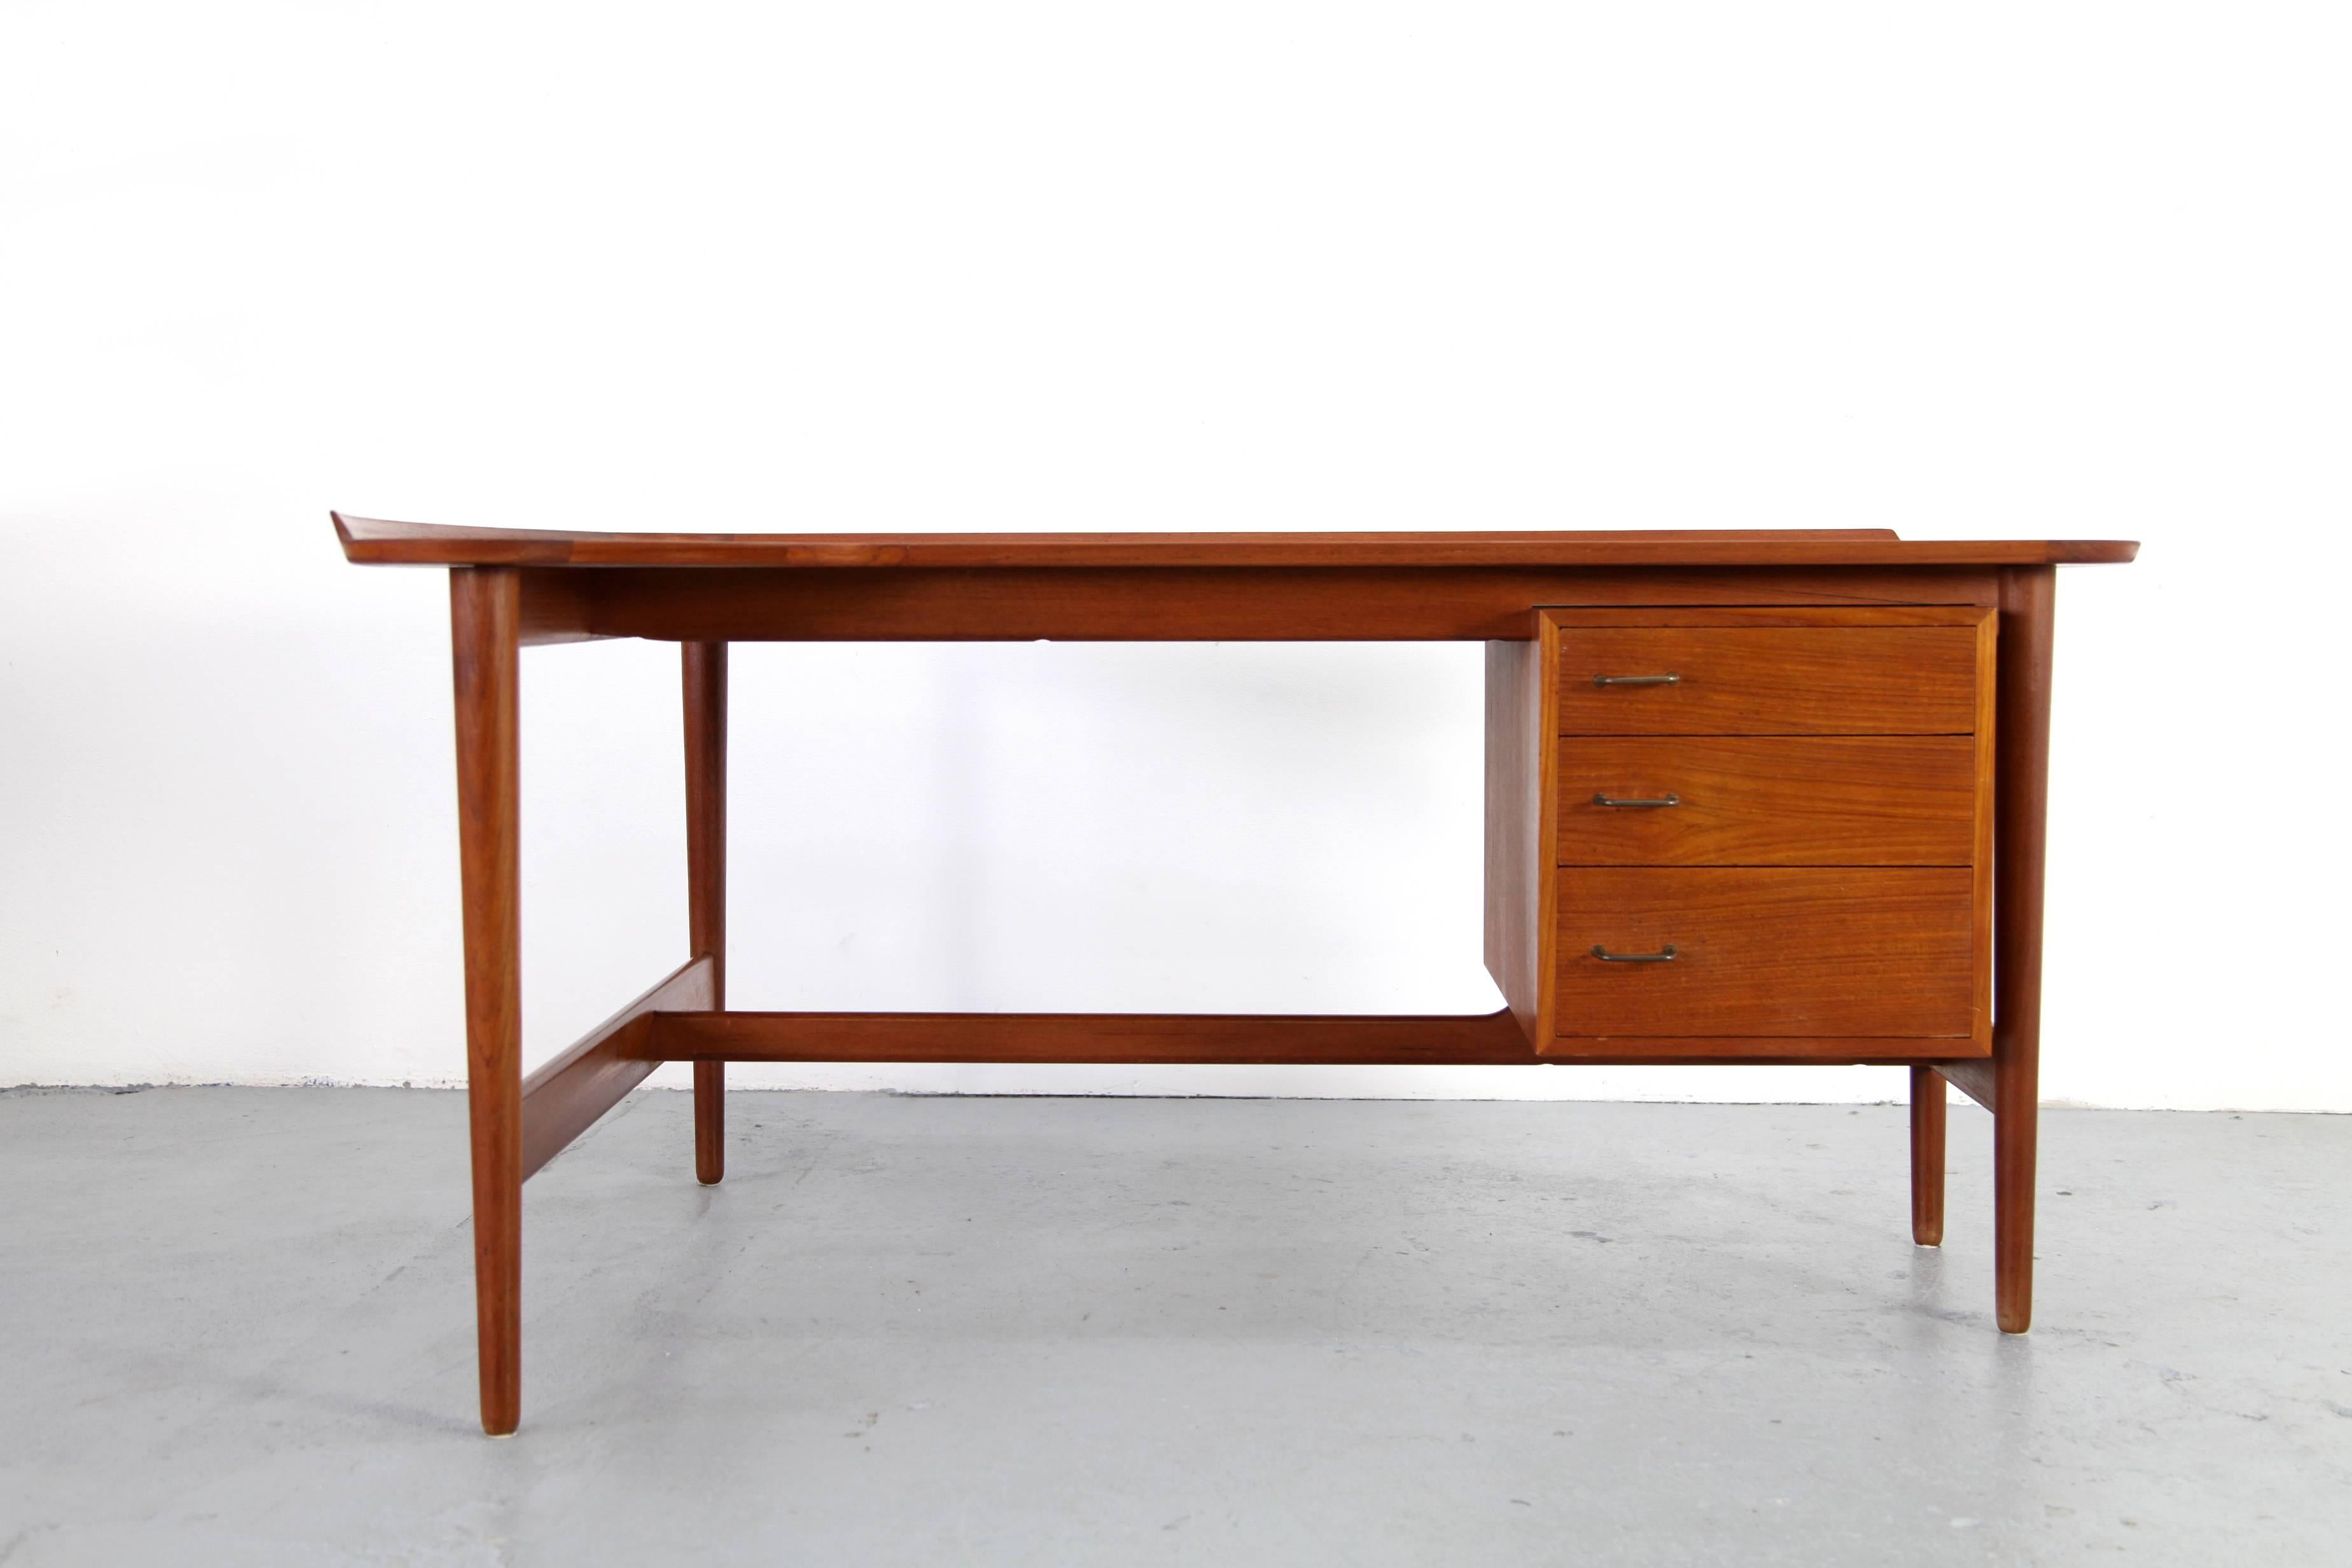 Exceptionally beautiful desk, designed by Arne Vodder, manufactured by Bovirke in Denmark. Beautiful L-shaped tabletop. Delicate wooden frame. Great condition of use.